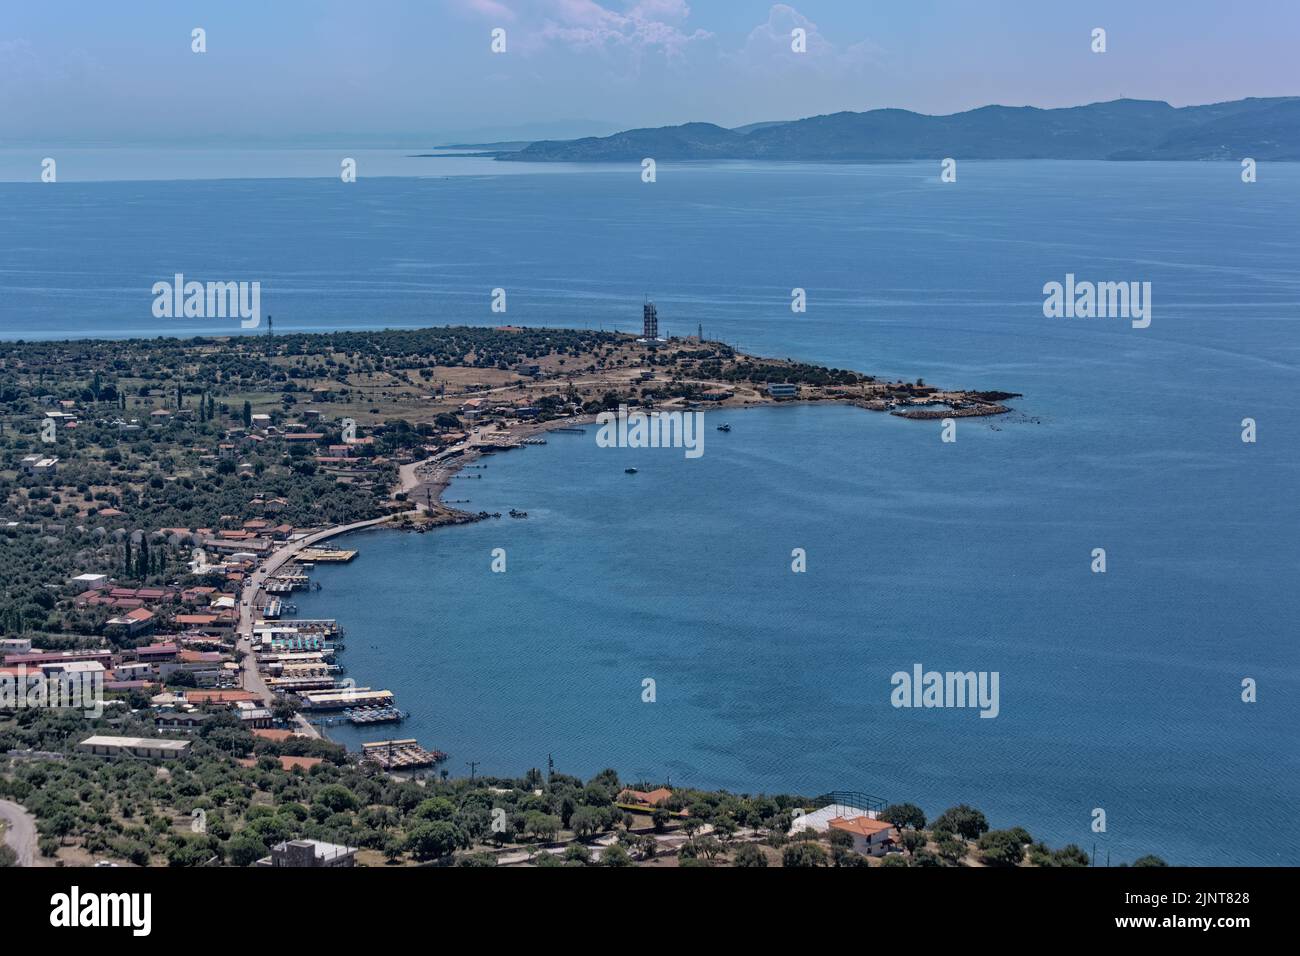 Panoramic view of Sivrice Bay in Aegean Sea coast of Turkey. Midilli Island in the background. Stock Photo